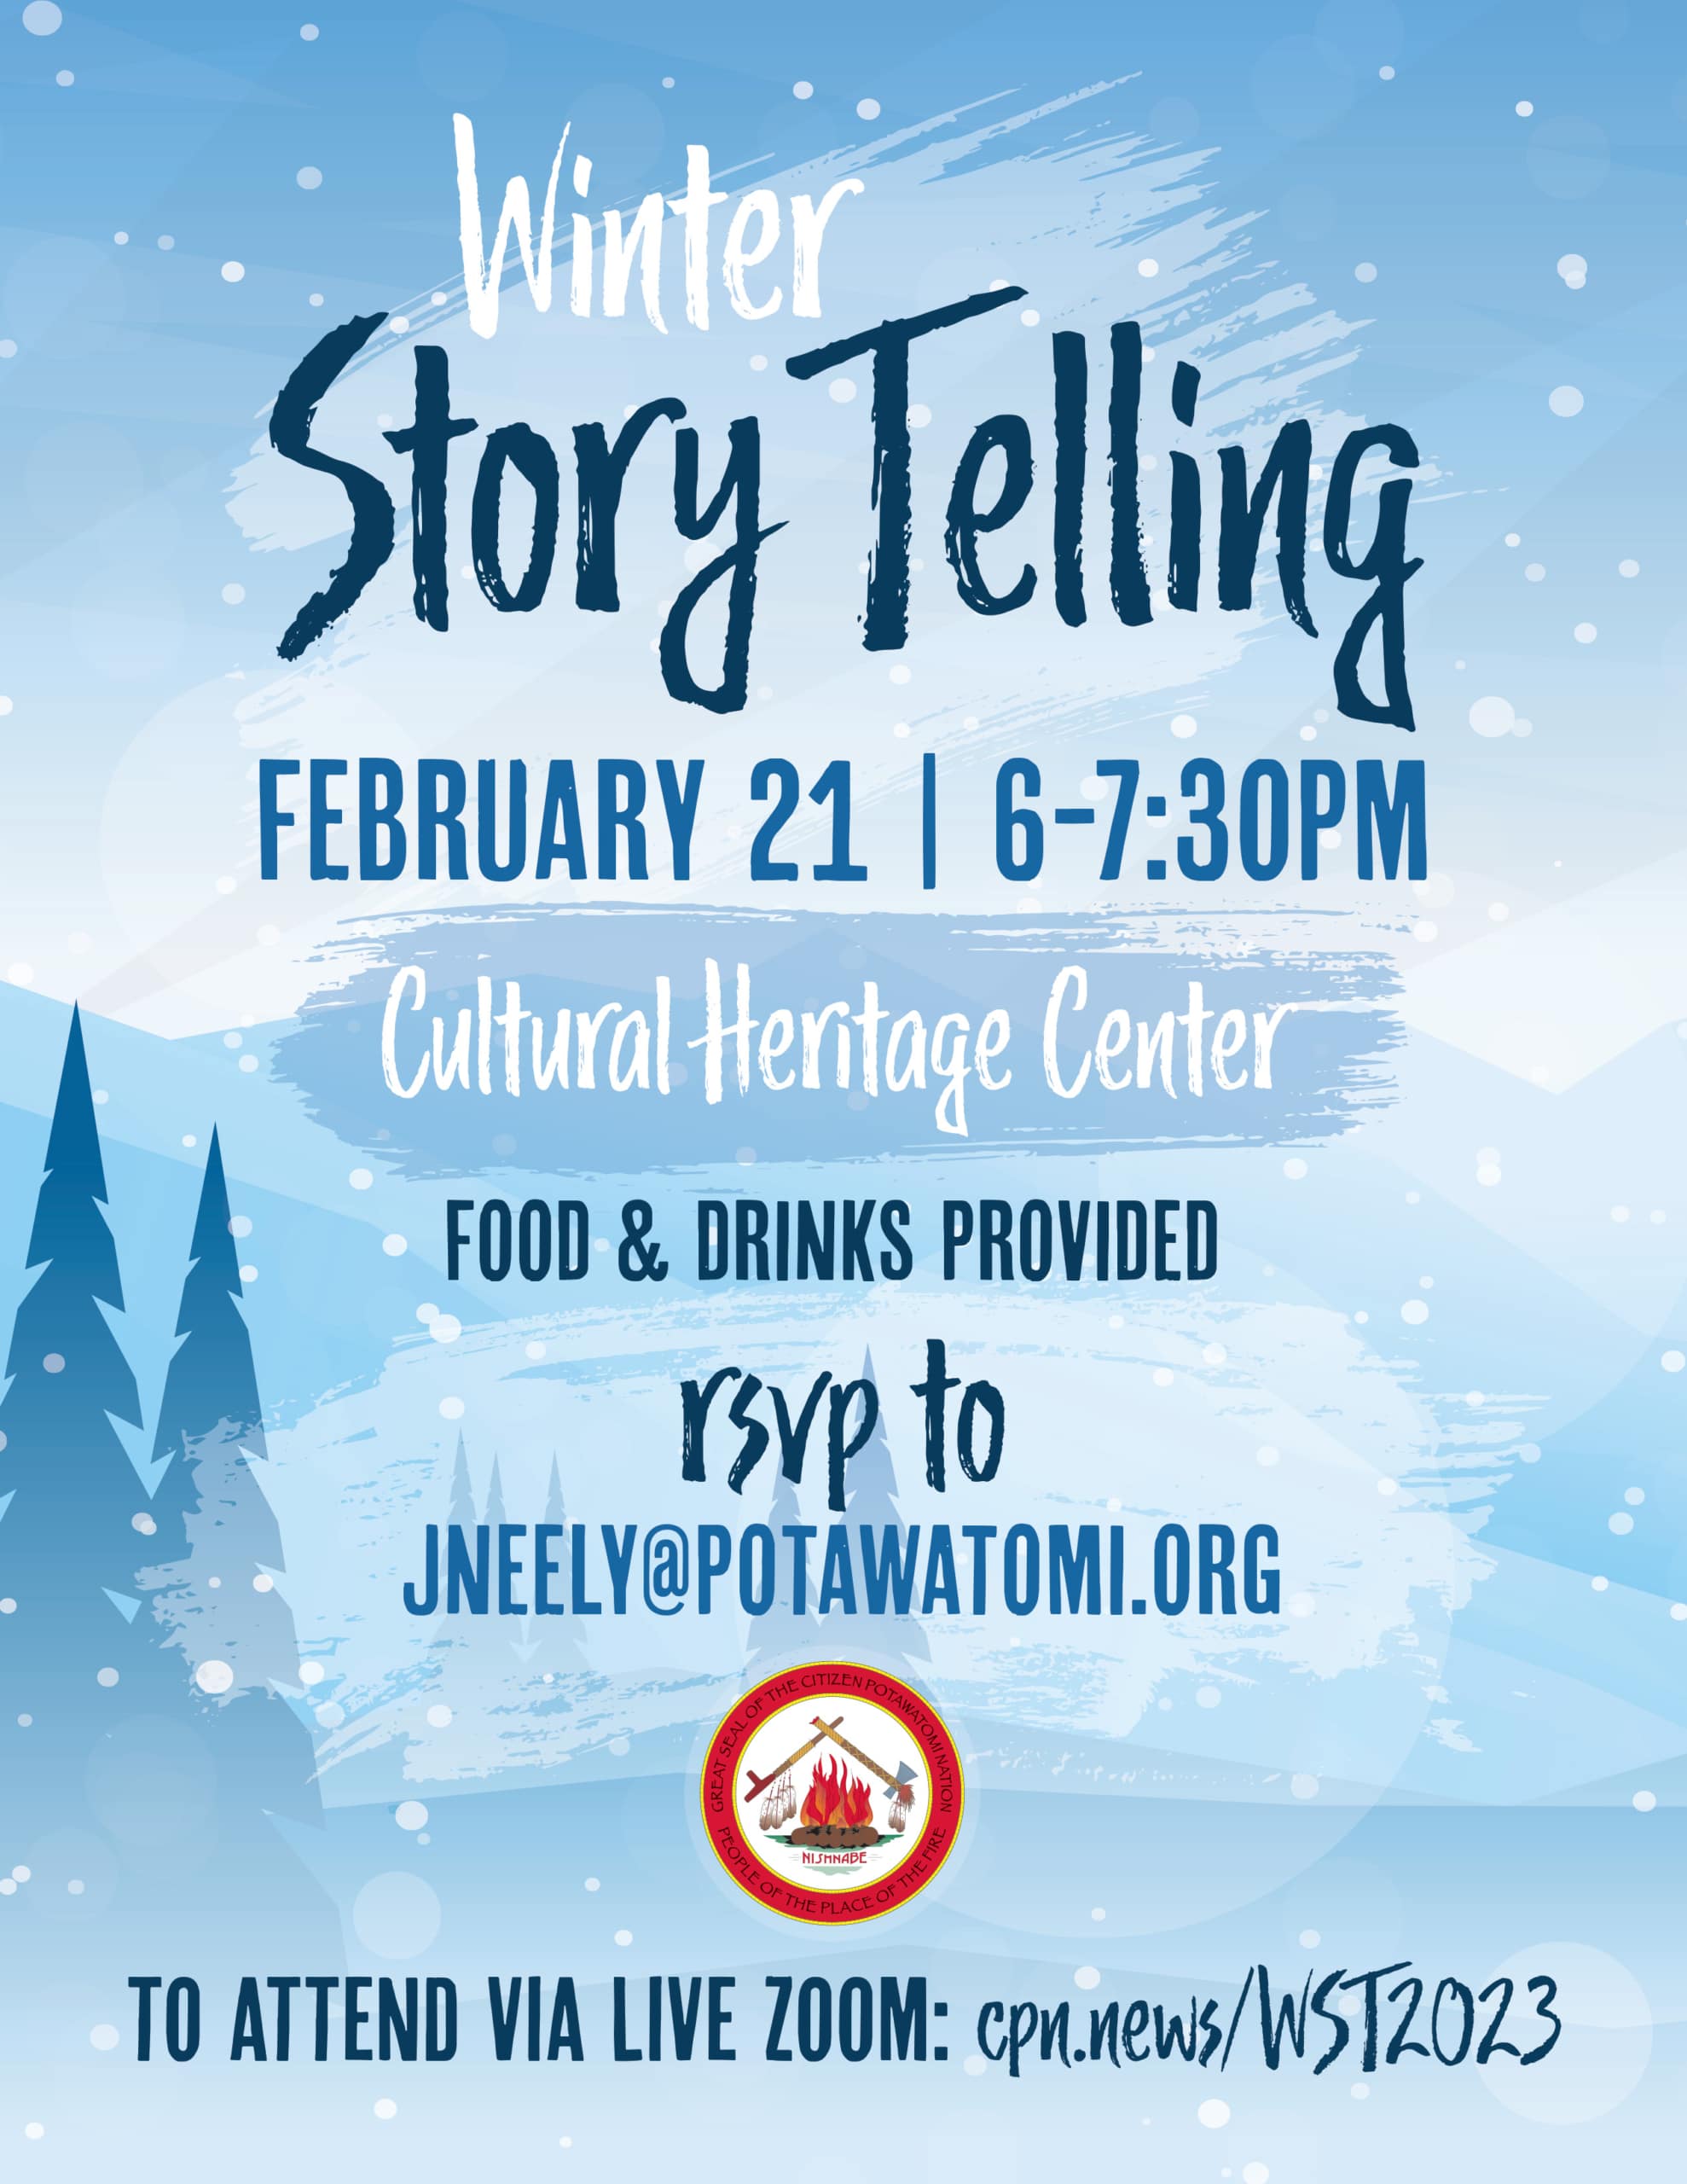 Abstract winter scene in shades of blue, with white and blue text advertising the CPN Winter Story Telling event on February 21, 2023, from 6:00 to 7:30 p.m. at the CPN Cultural Heritage Center. Attend online at cpn.news/WST2023. RSVP to jneely@potawatomi.org.